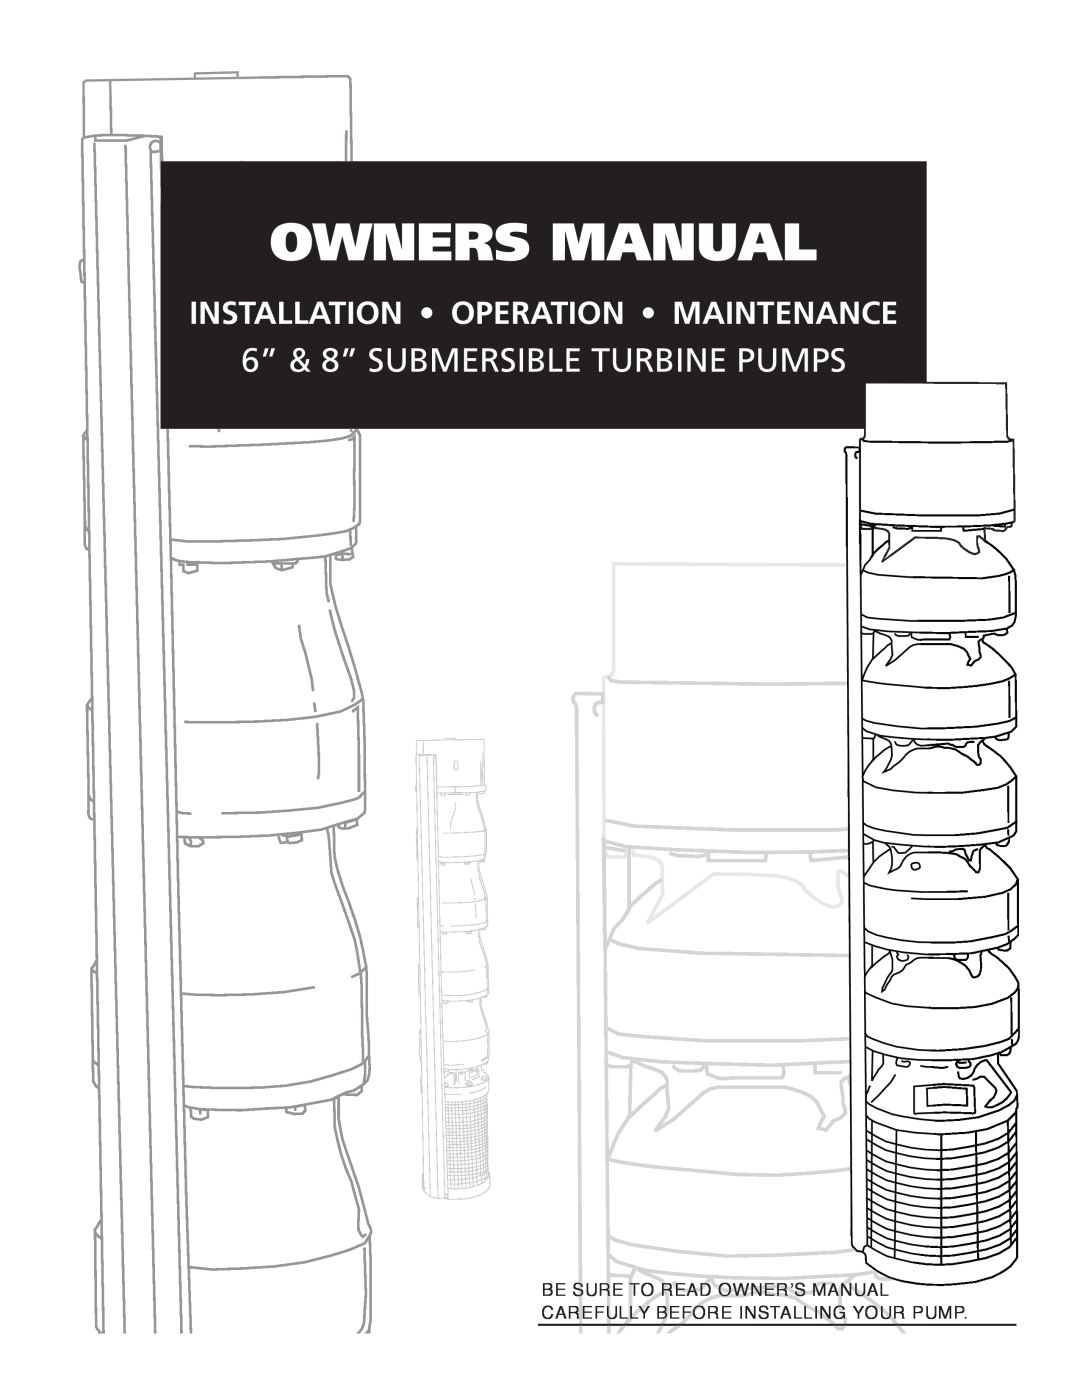 Franklin Water Pump owner manual Owners Manual, 6” & 8” SUBMERSIBLE TURBINE PUMPS, Installation Operation Maintenance 